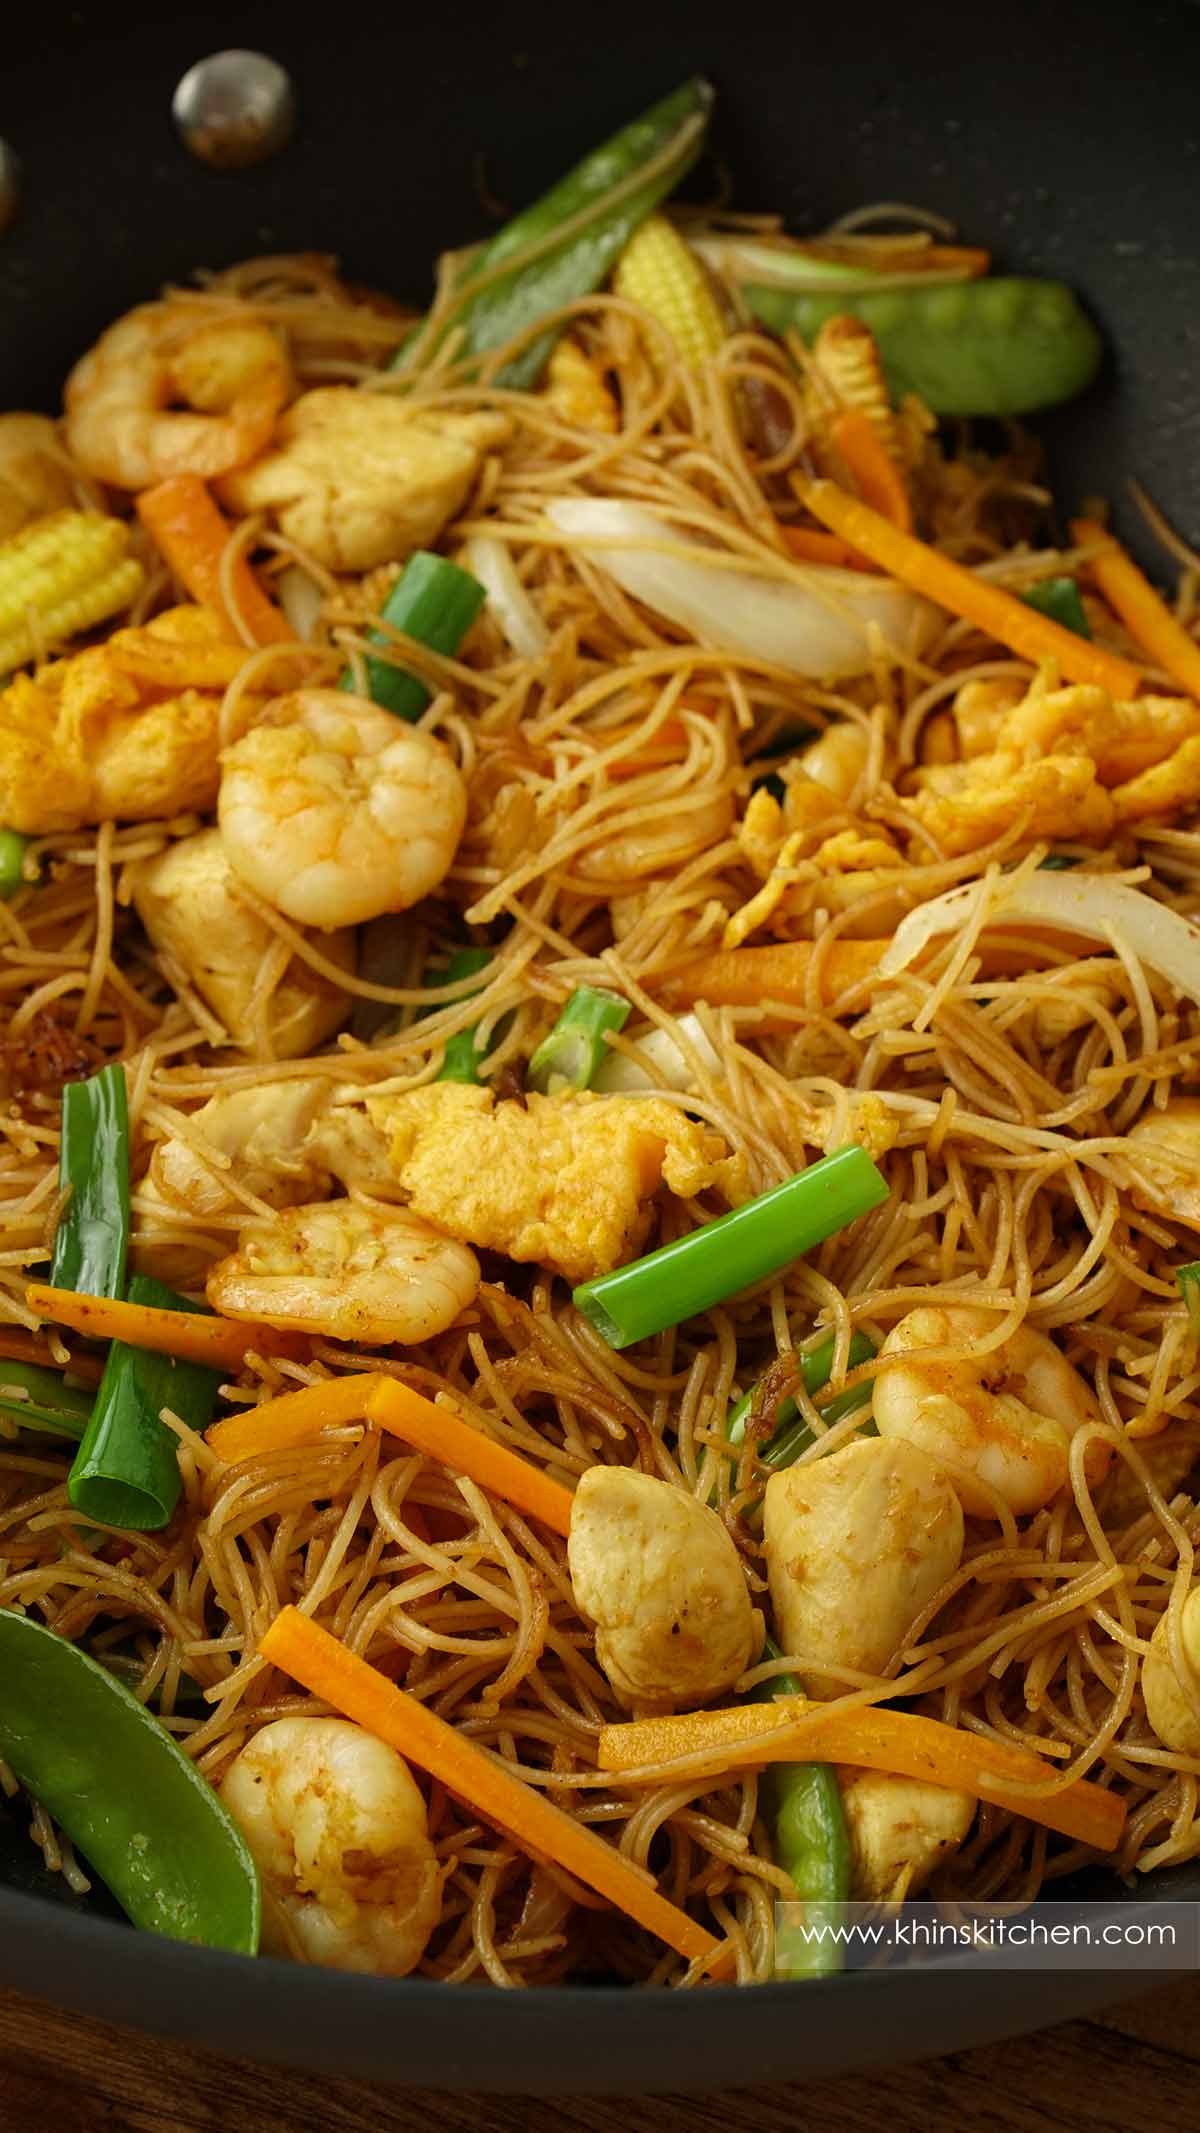 A black wok containing, stir fried Singapore-style mei fun noodles with eggs, prawns, chicken and vegetables.